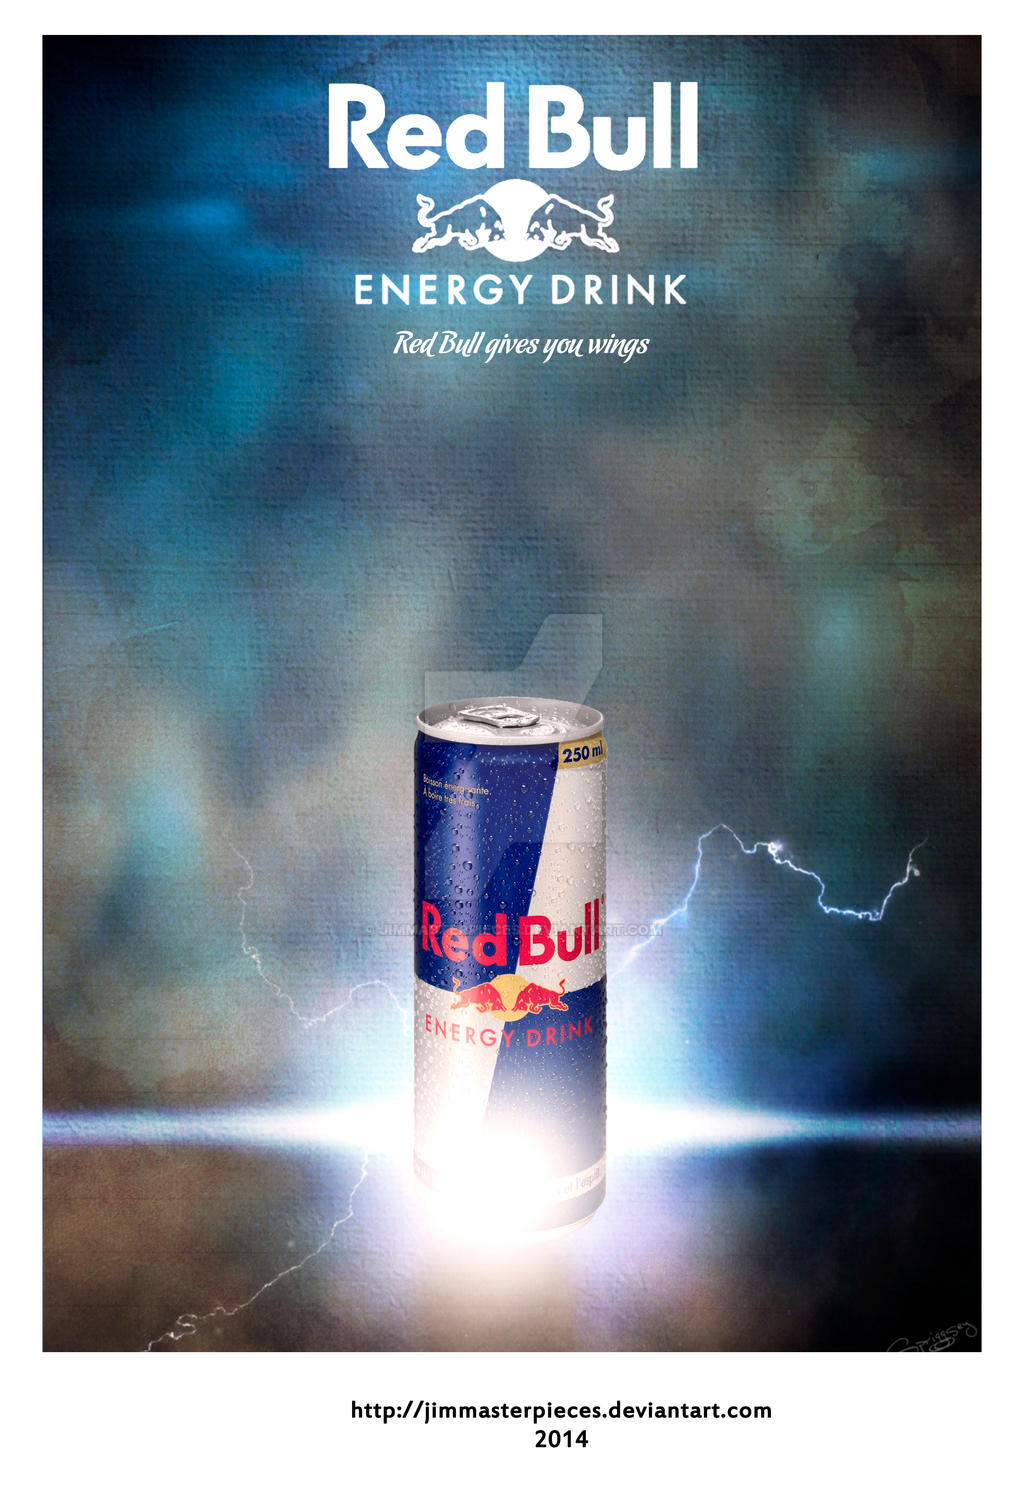 red bull gives you wings by Jimmasterpieces on DeviantArt